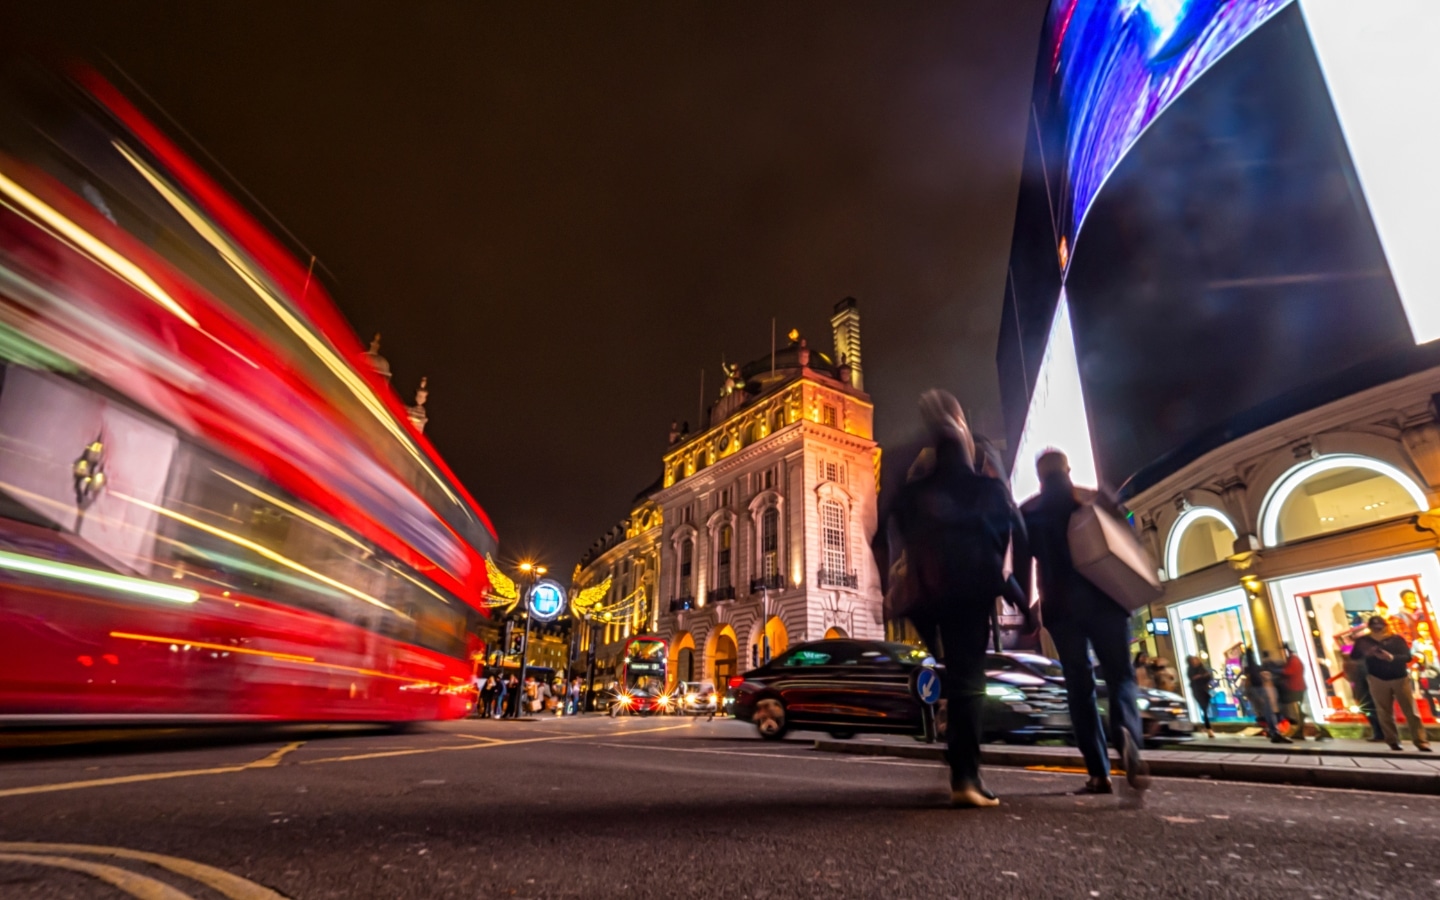 Free Things To Do in Piccadilly Circus